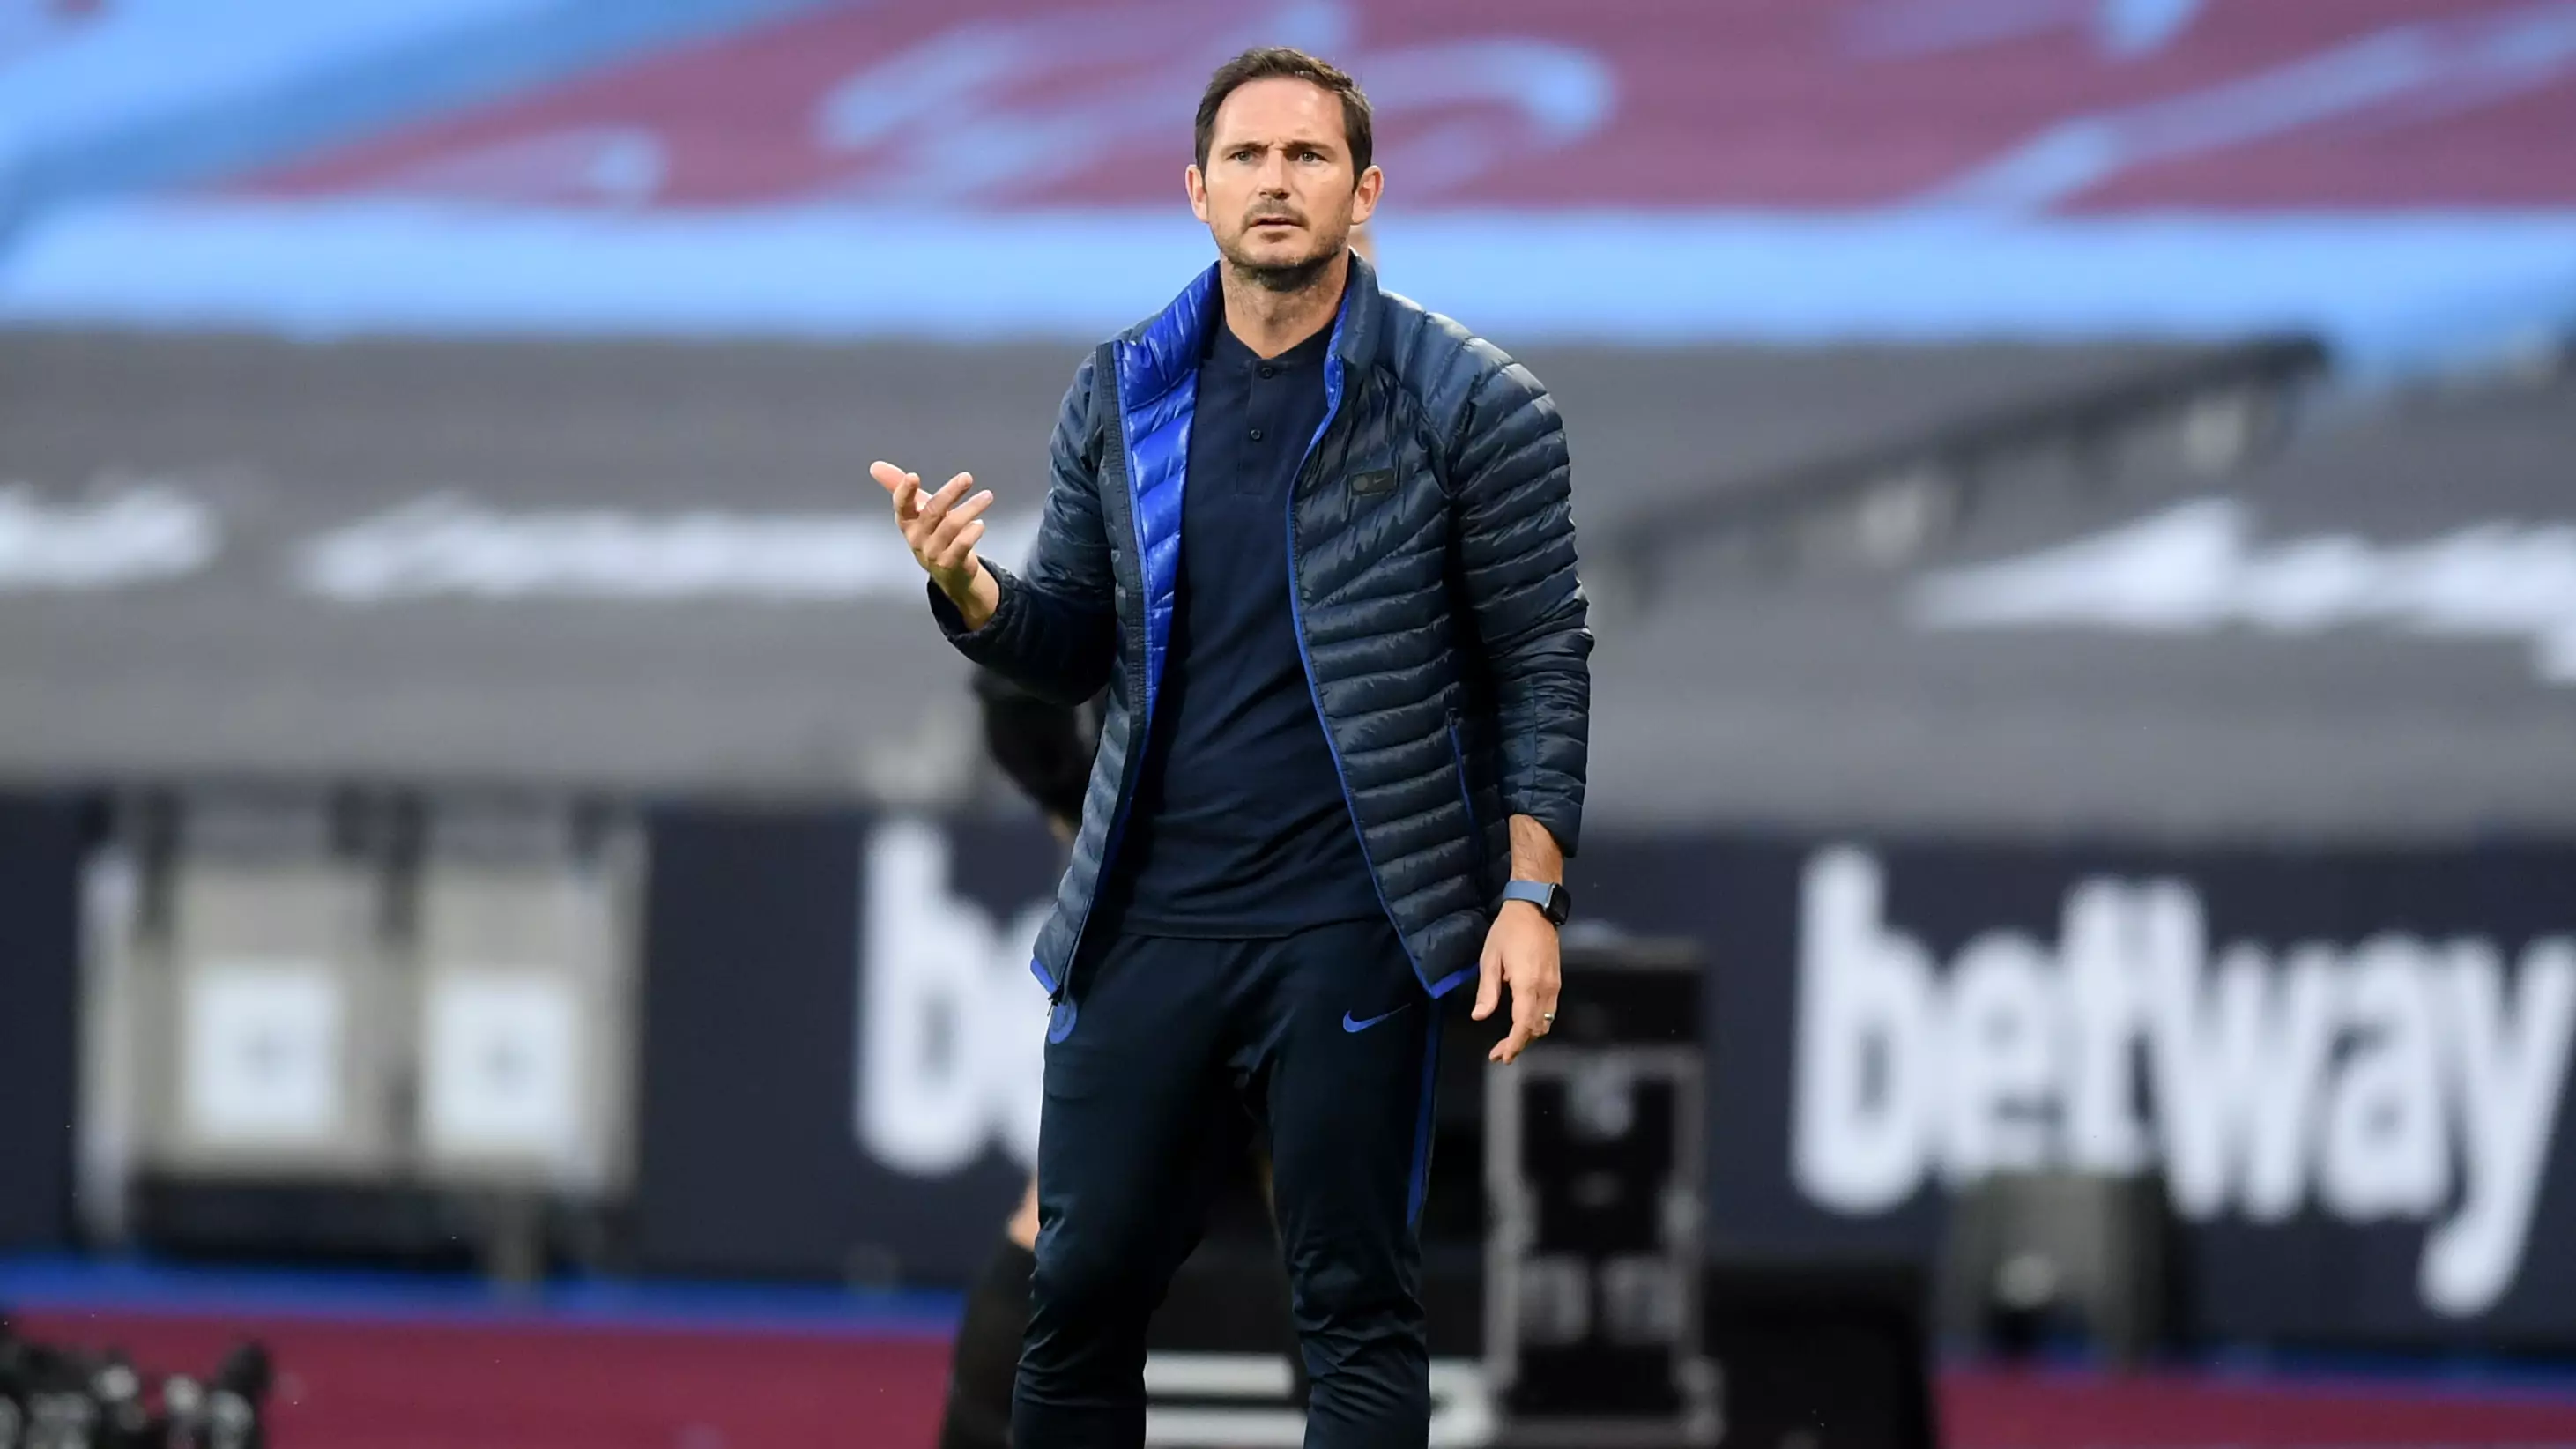 Pundits' Top Four Predictions Show How Frank Lampard Has Overachieved With Chelsea